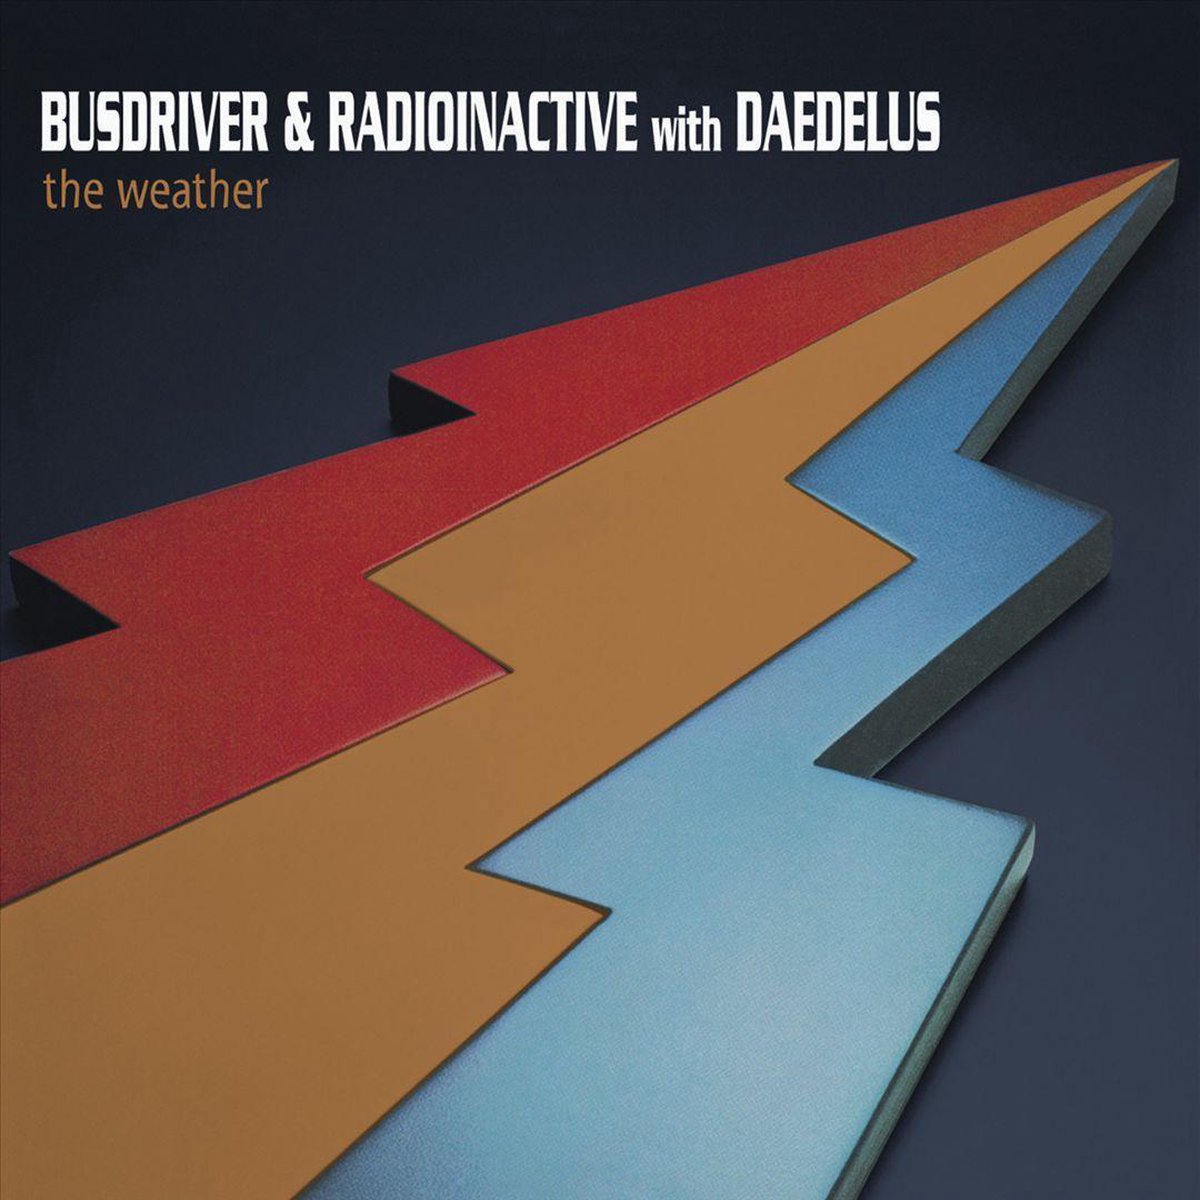 Weather - Busdriver & Radioinactive with Daedelus